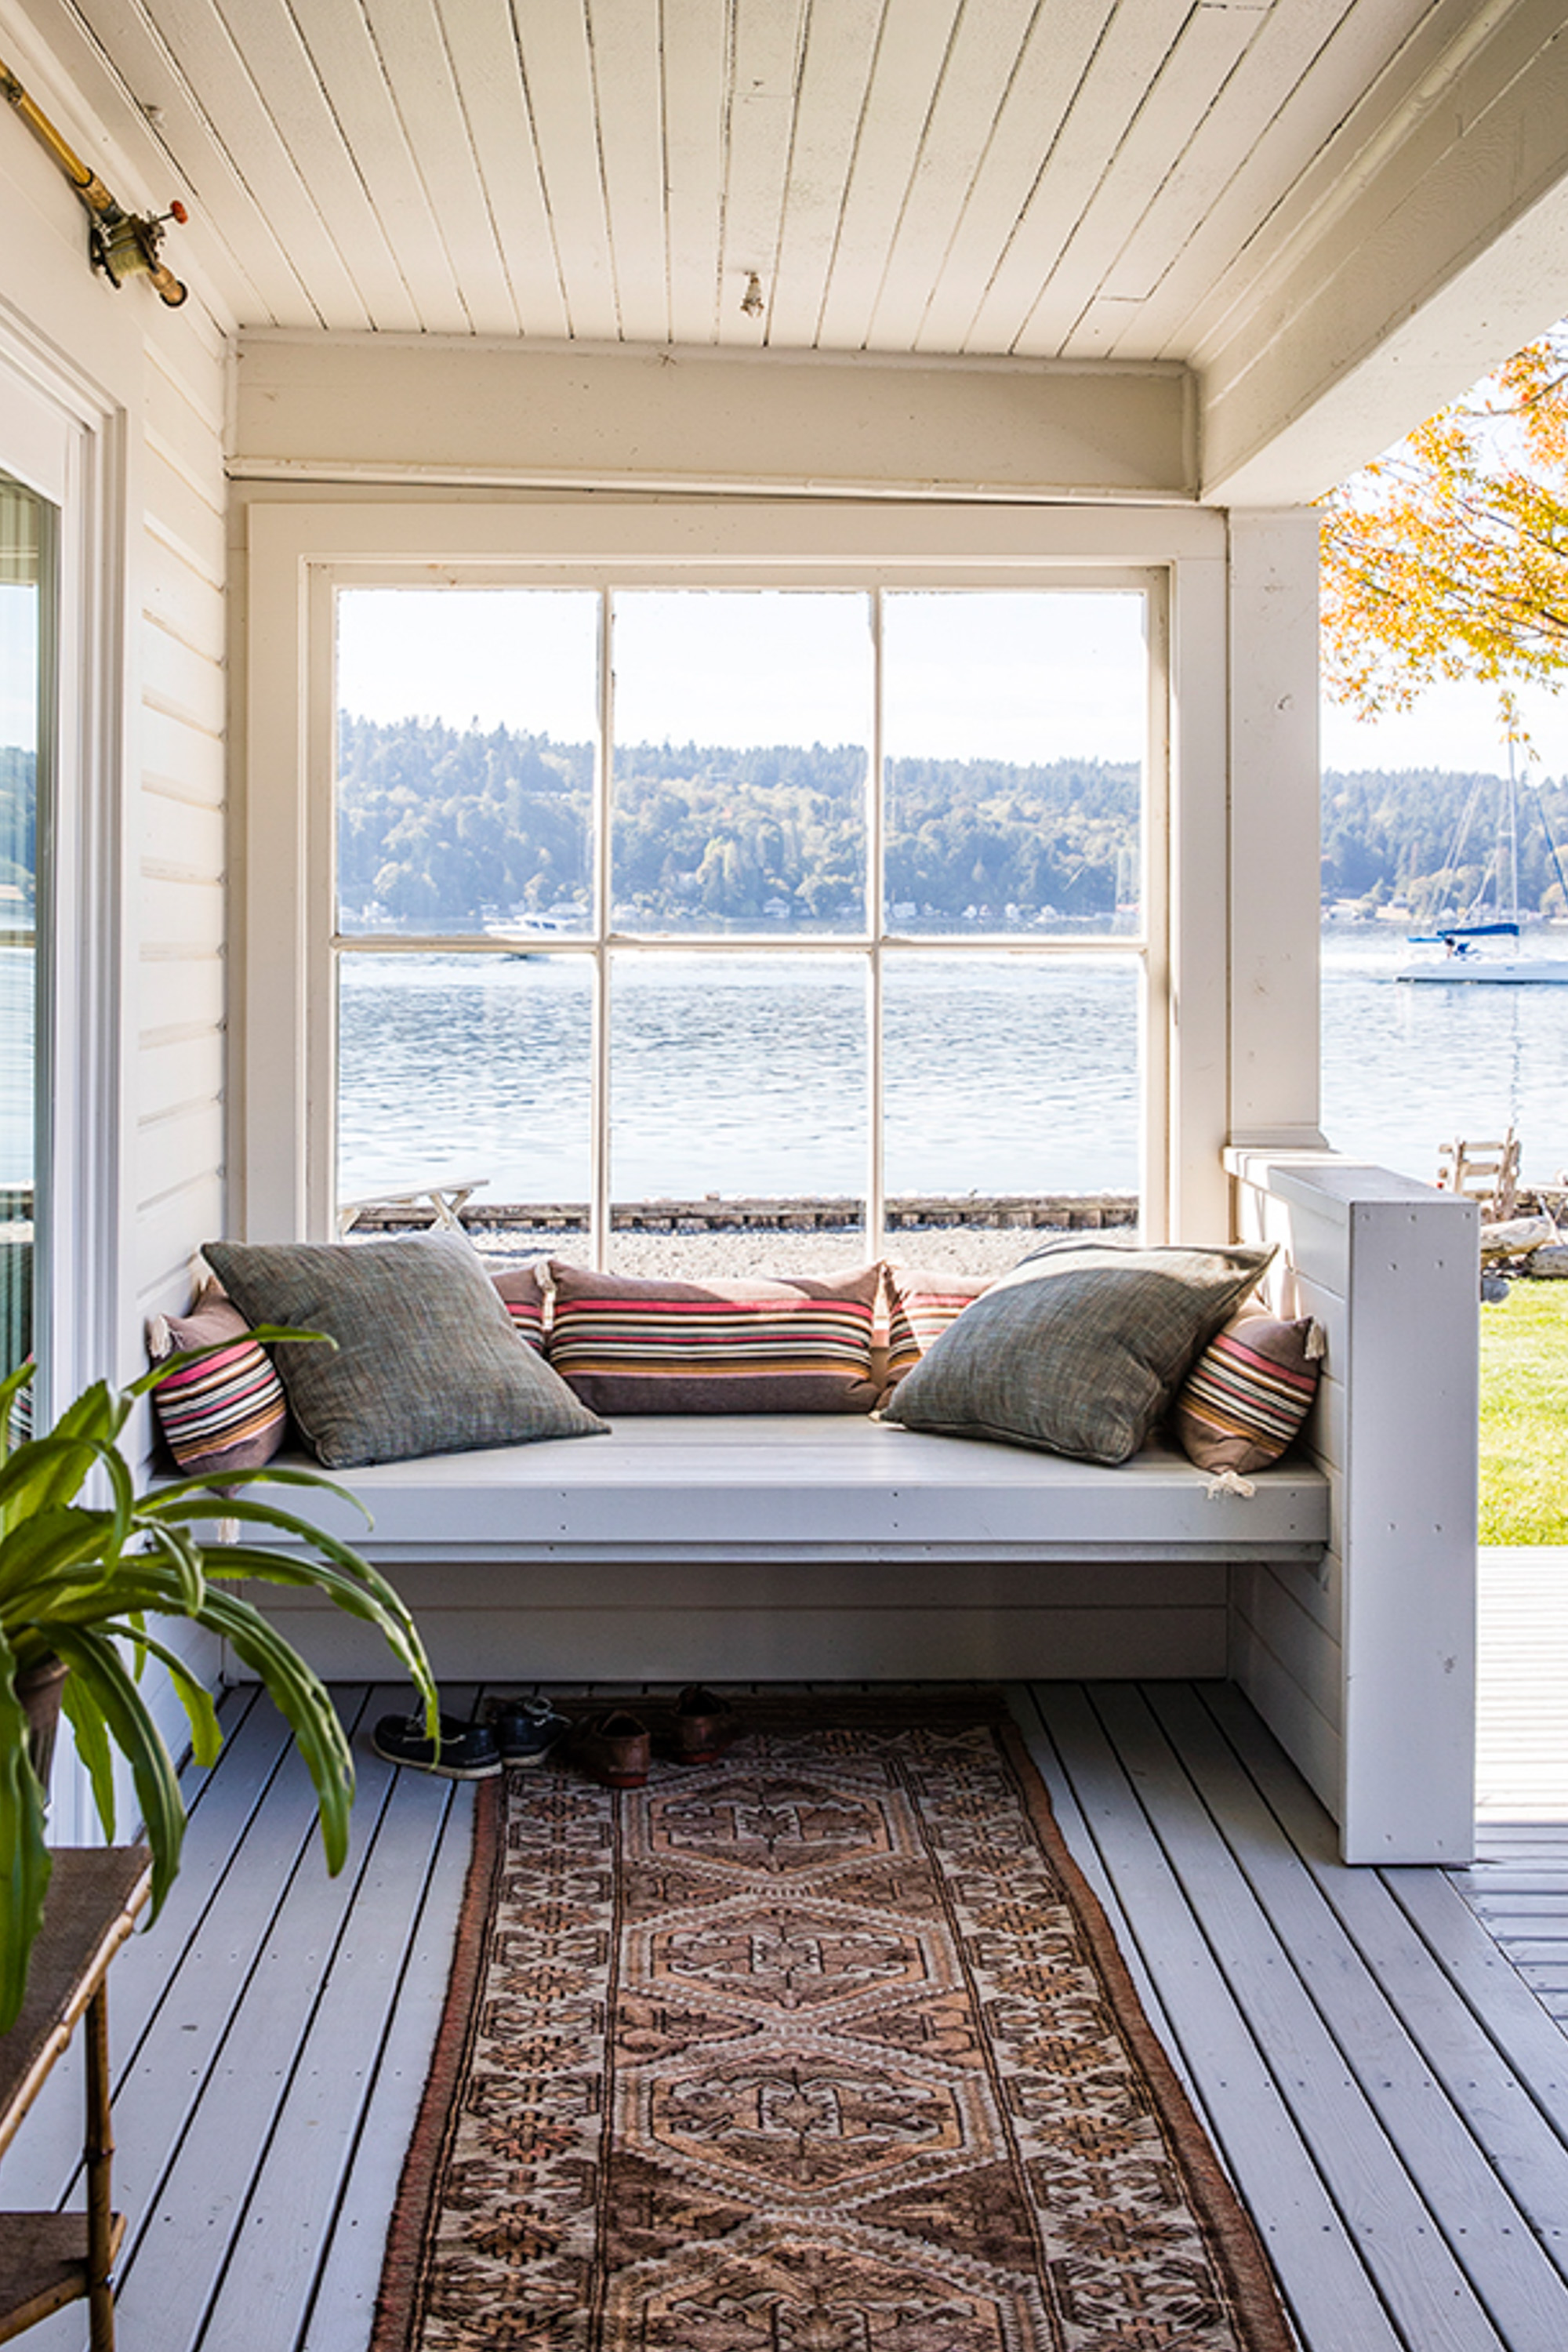 The outdoor window seat, once the home's covered front porch, offers a cozy spot with the best view on the property. Protected from the elements, it's perfect for lounging in summer or winter, enjoying shelter and sea air.